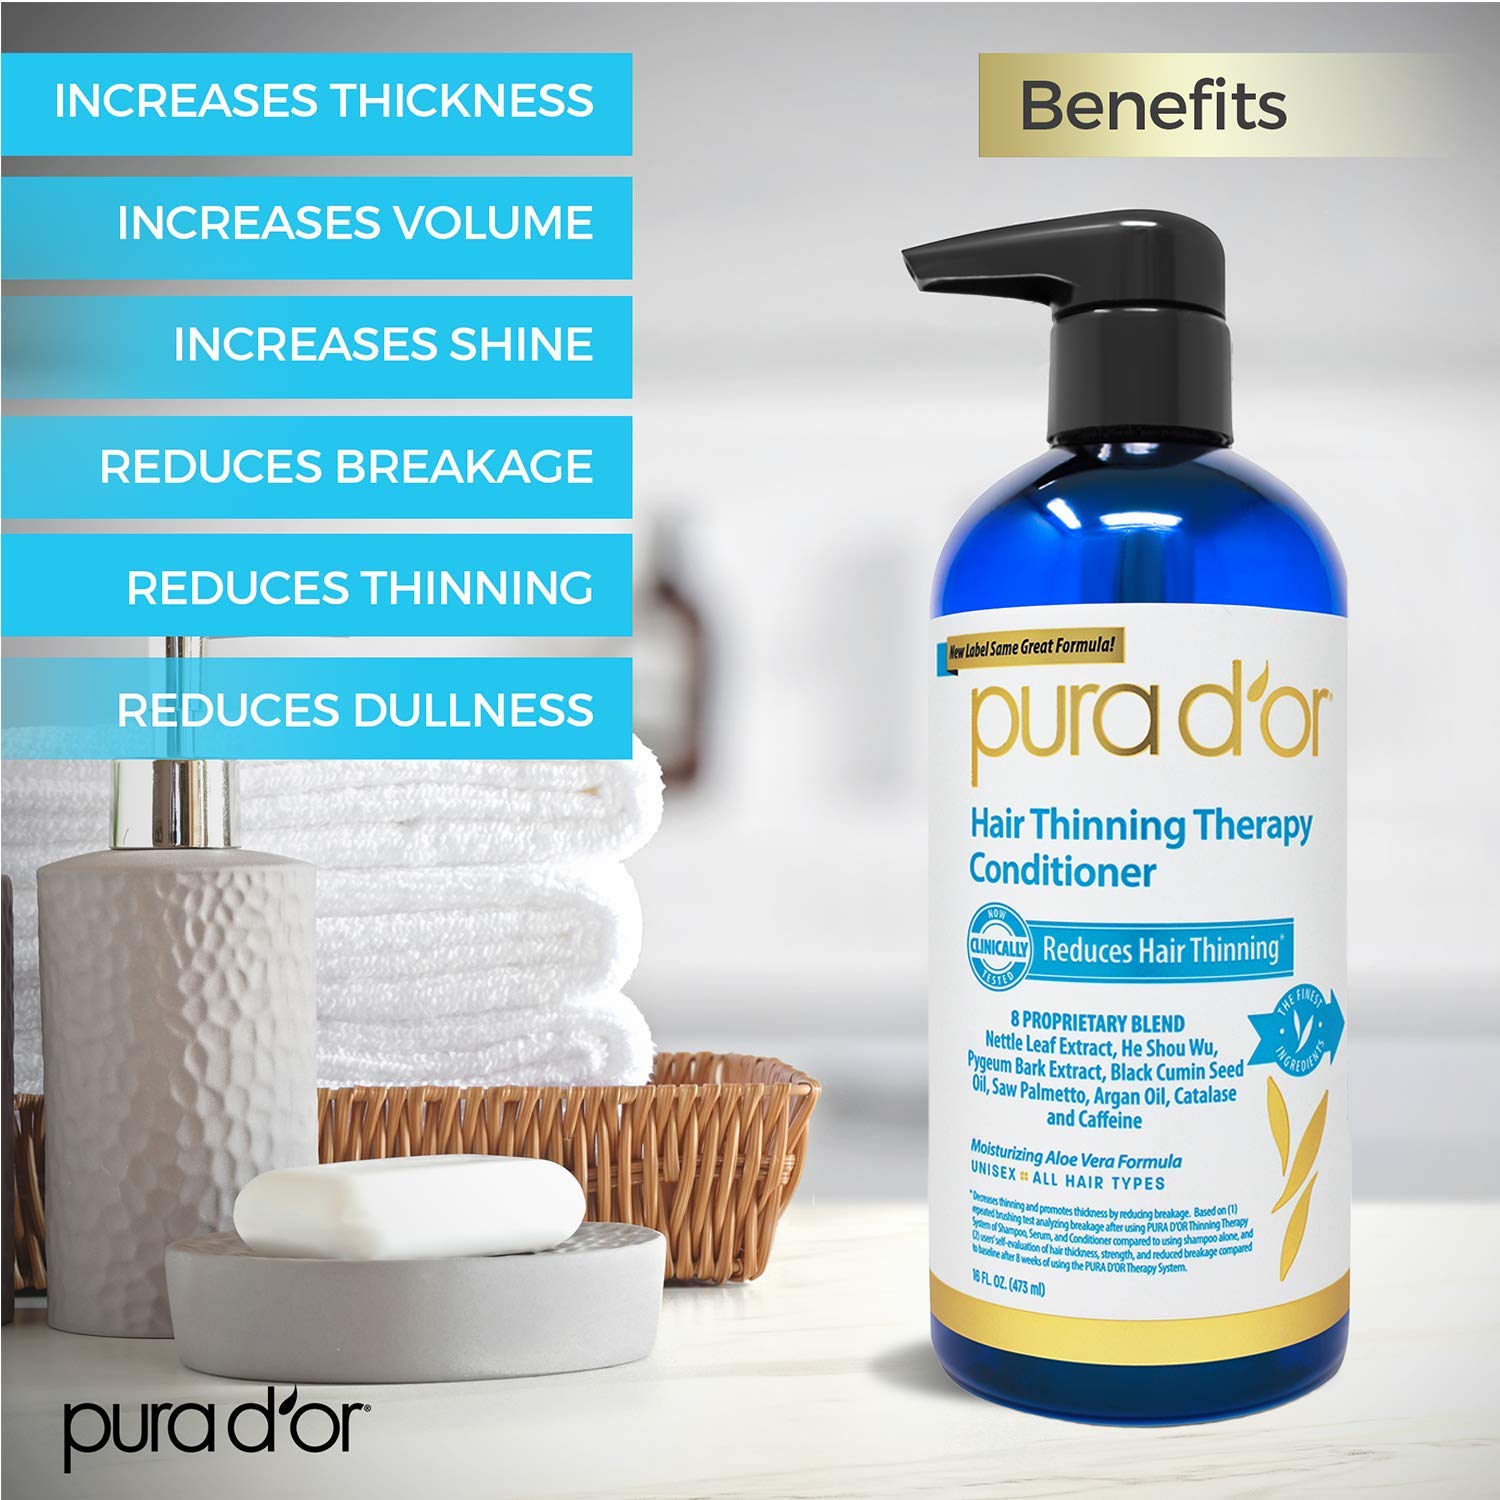 PURA D'OR Hair Thinning Therapy 3-Piece Set, Shampoo, Conditioner & Masque for Best Results, Infused with Argan Oil, Biotin & Natural Ingredients, All Hair Types, Men & Women (Packaging may vary)